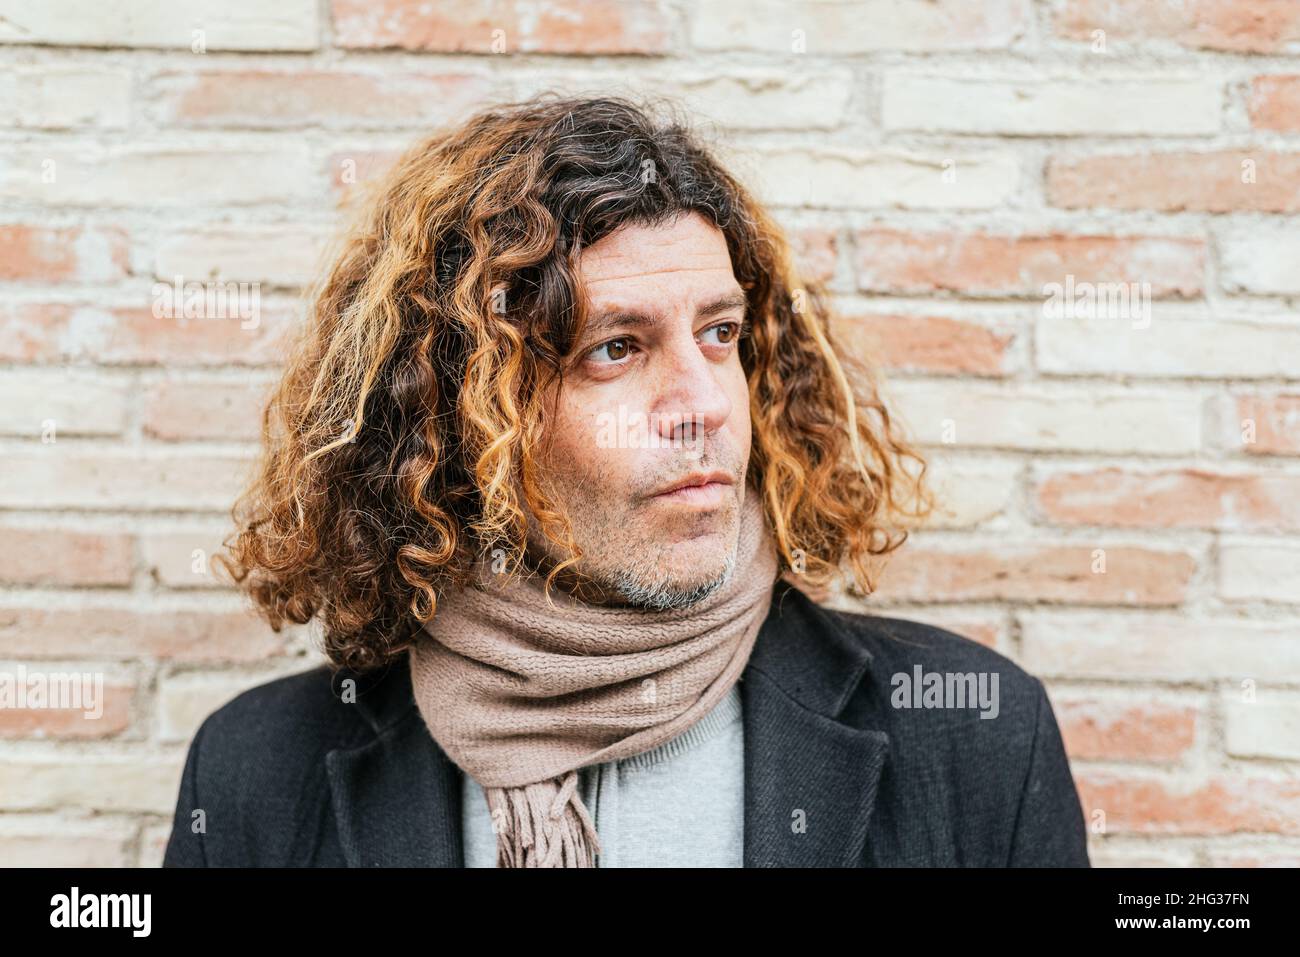 Mature man in scarf with curly hair looking away while standing against brick wall in city Stock Photo